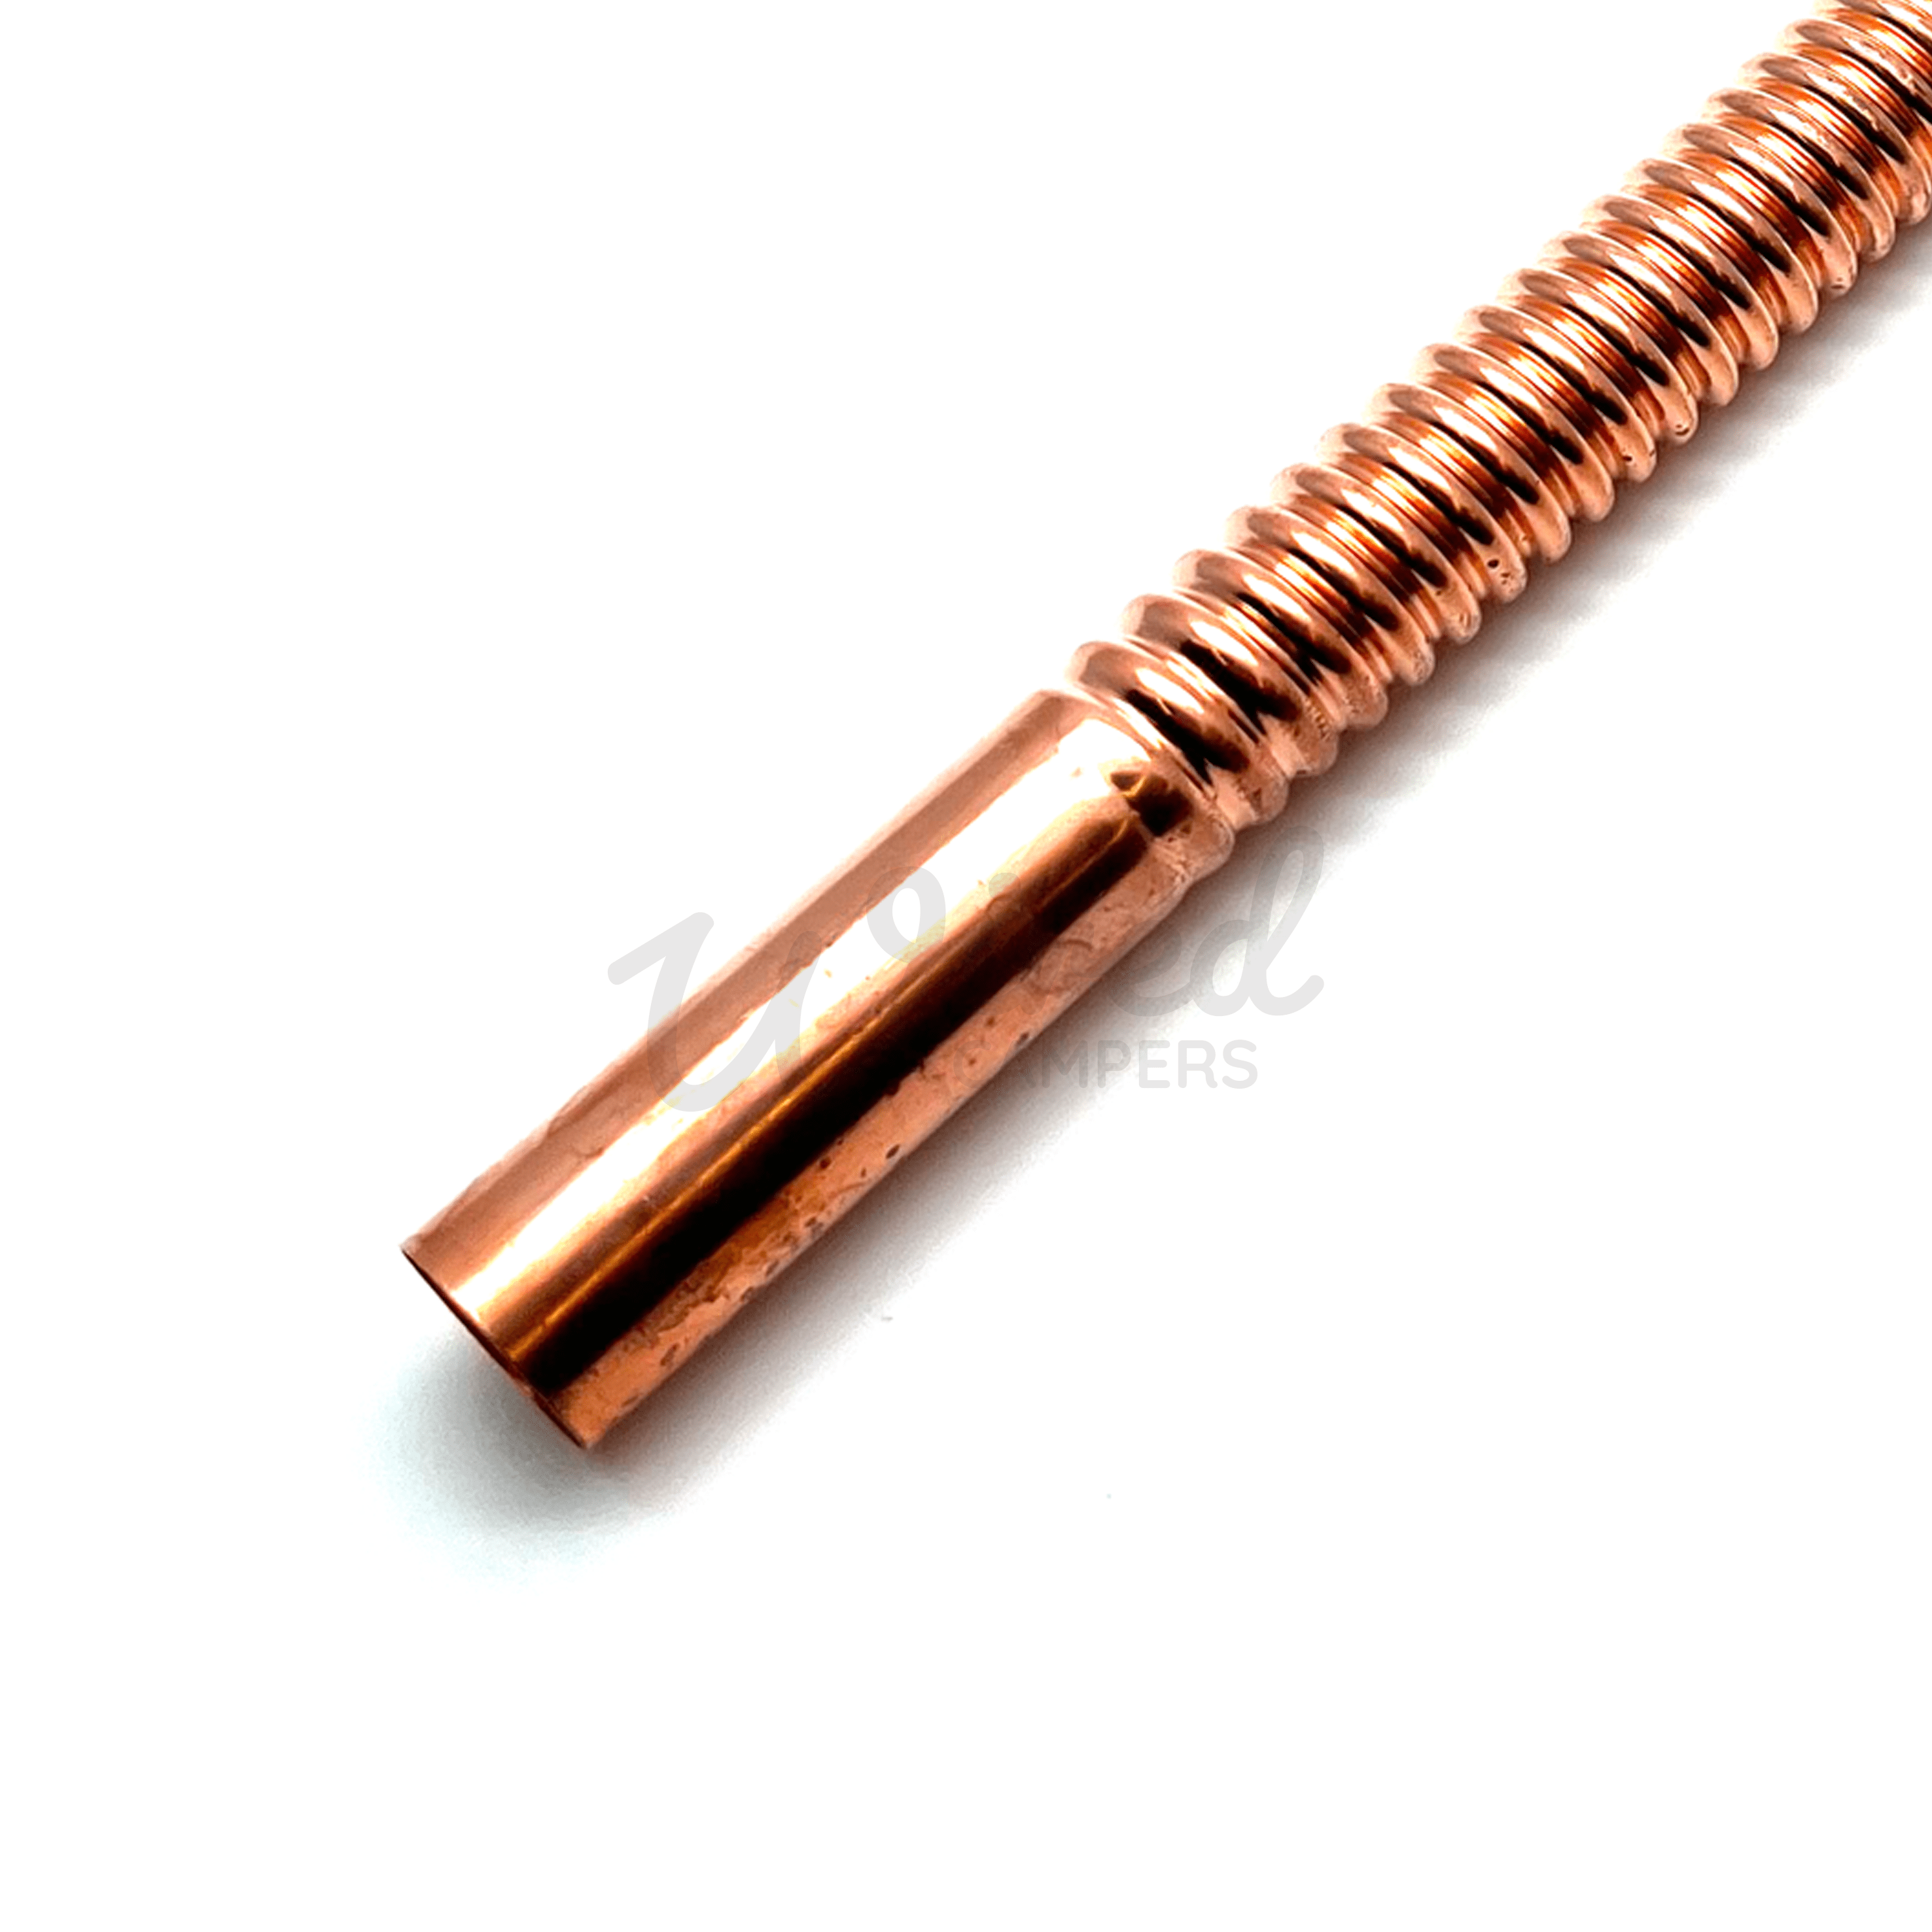 Wired Campers Limited Flexible Copper Plumbing Pipe Stick - 15MM X 300MM